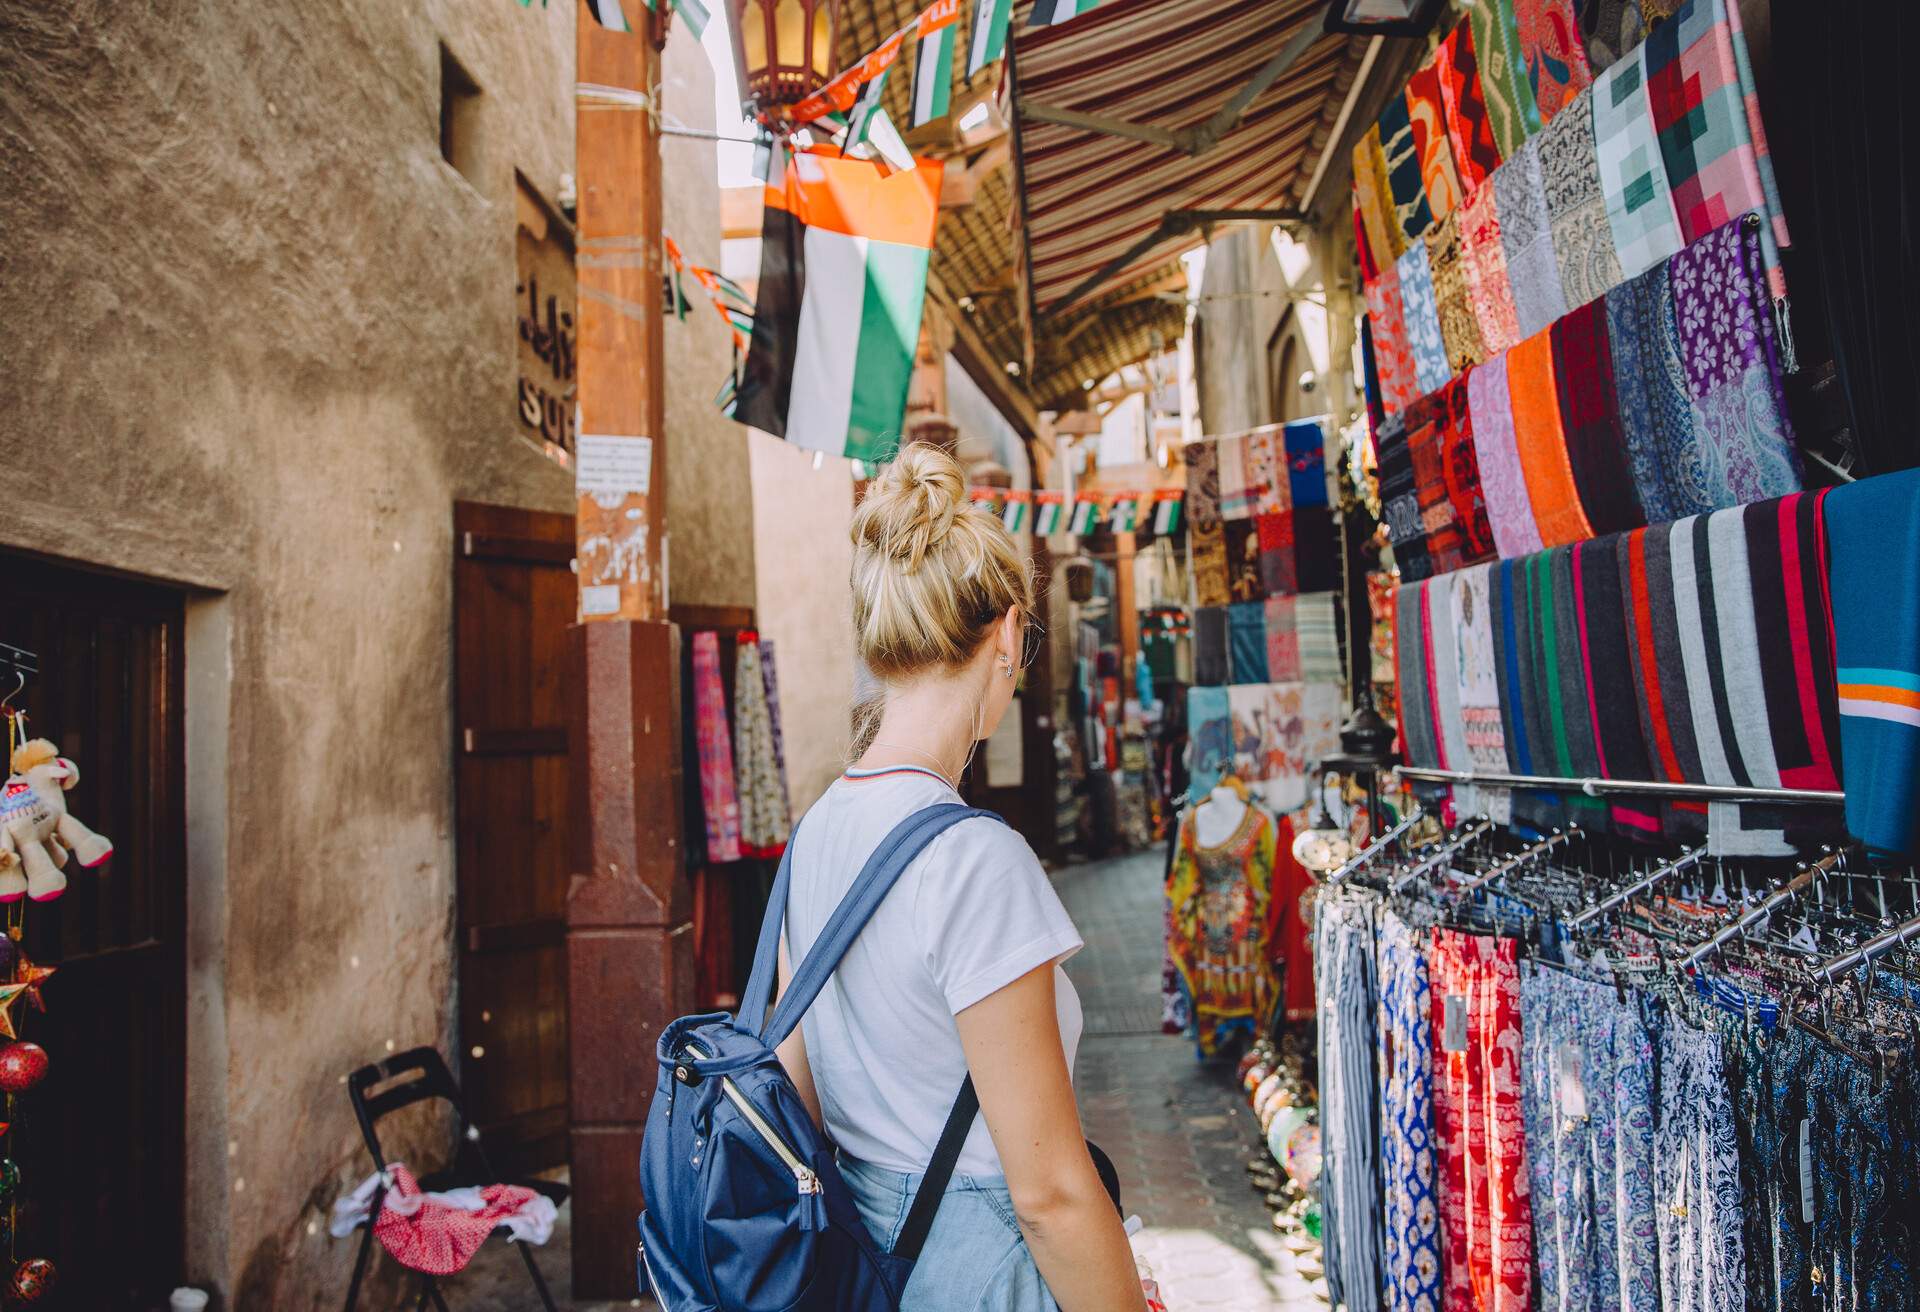 Back view of young female traveller at traditional bazaar in Dubai, UAE; Shutterstock ID 1103214140